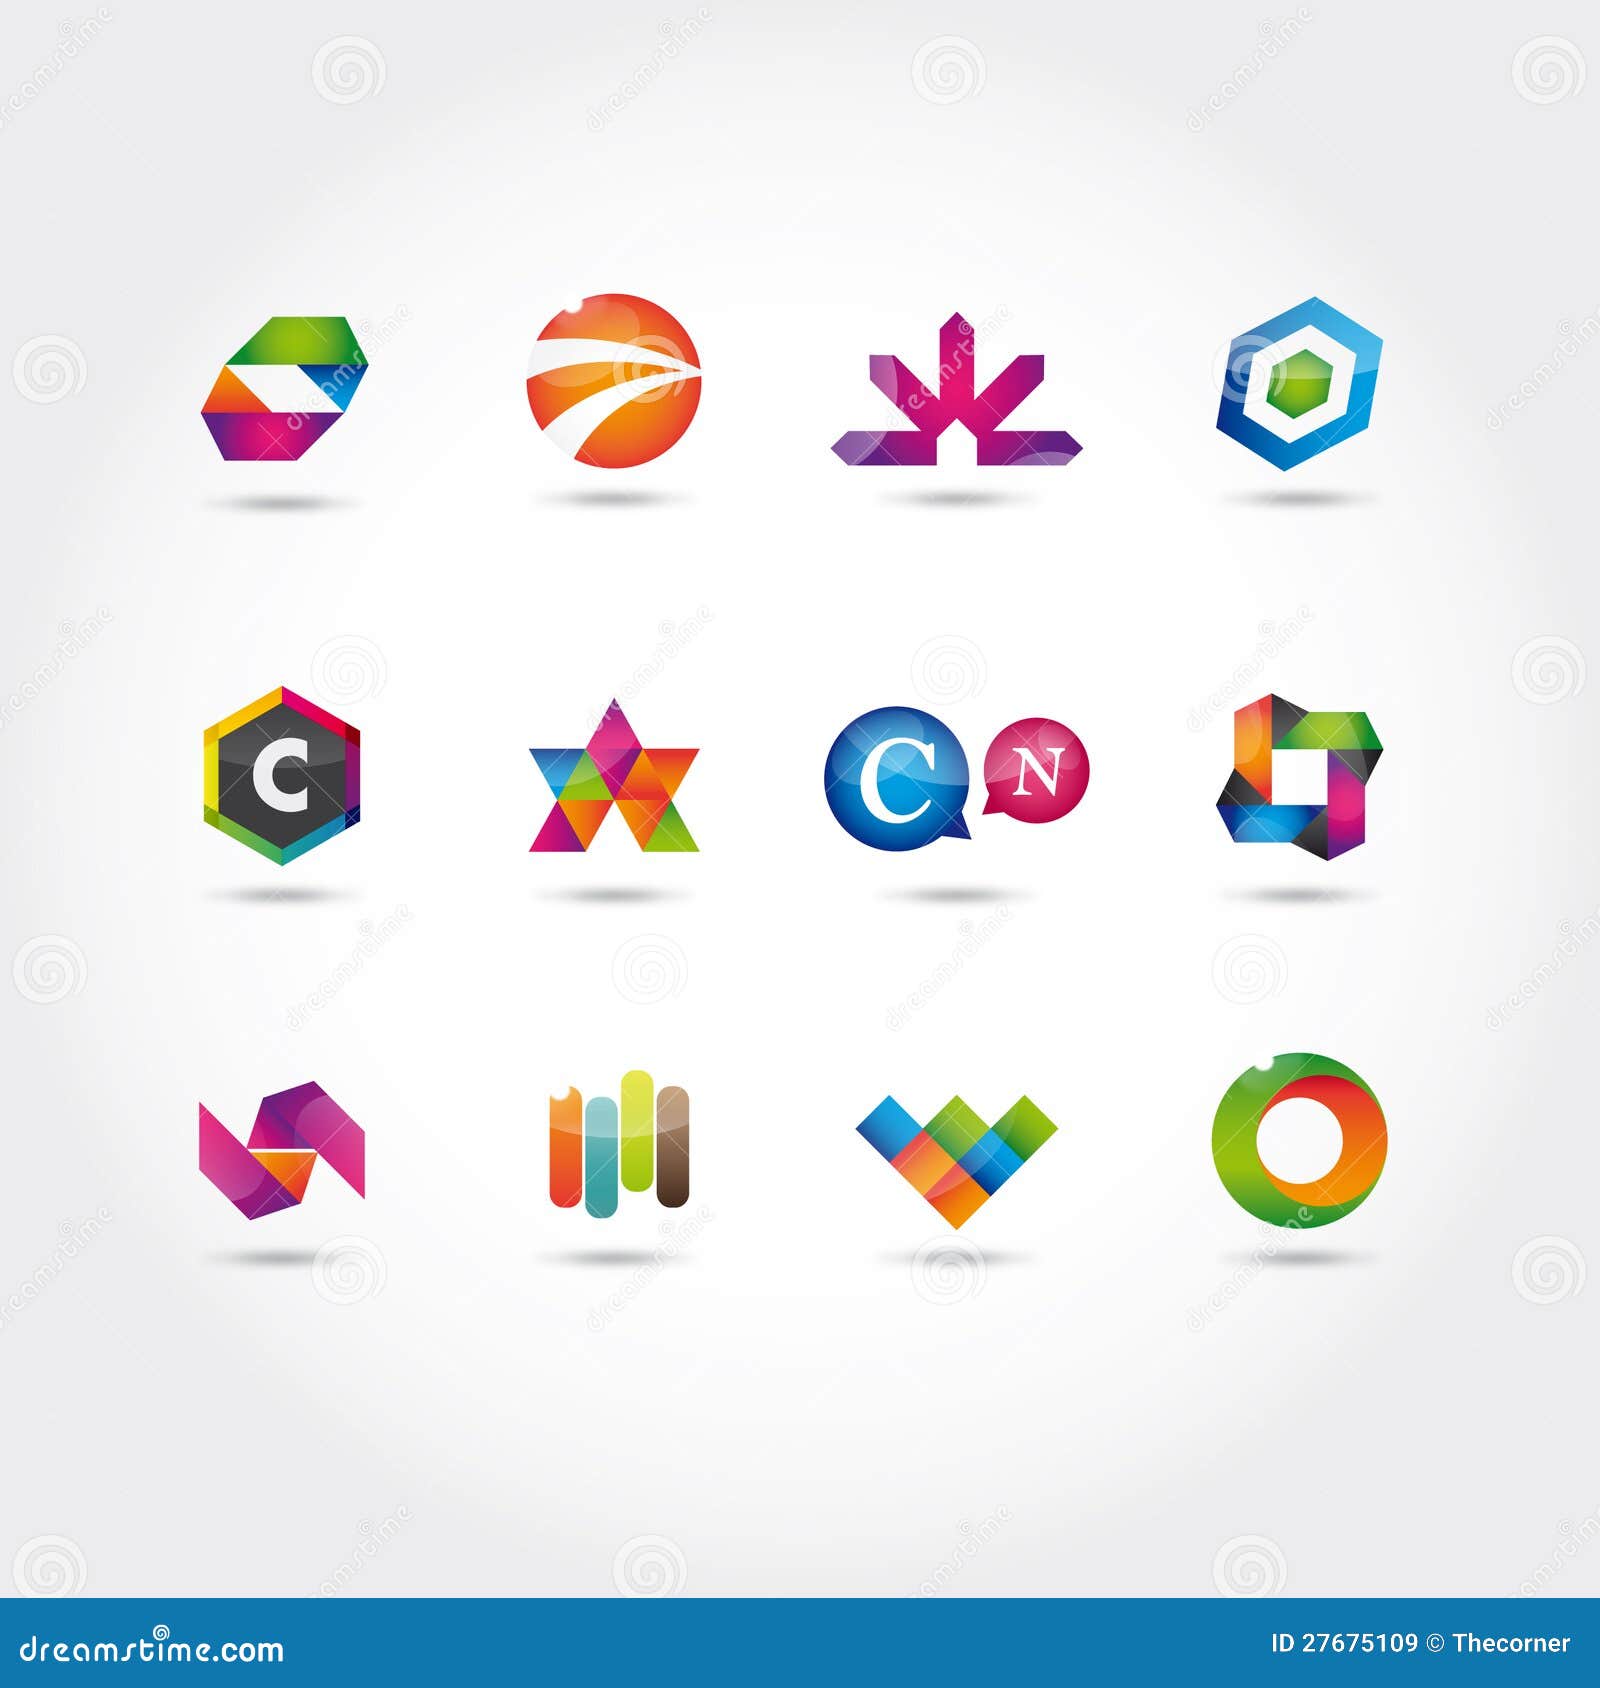 Set Of Logo And Icons Royalty Free Stock Images - Image: 27675109